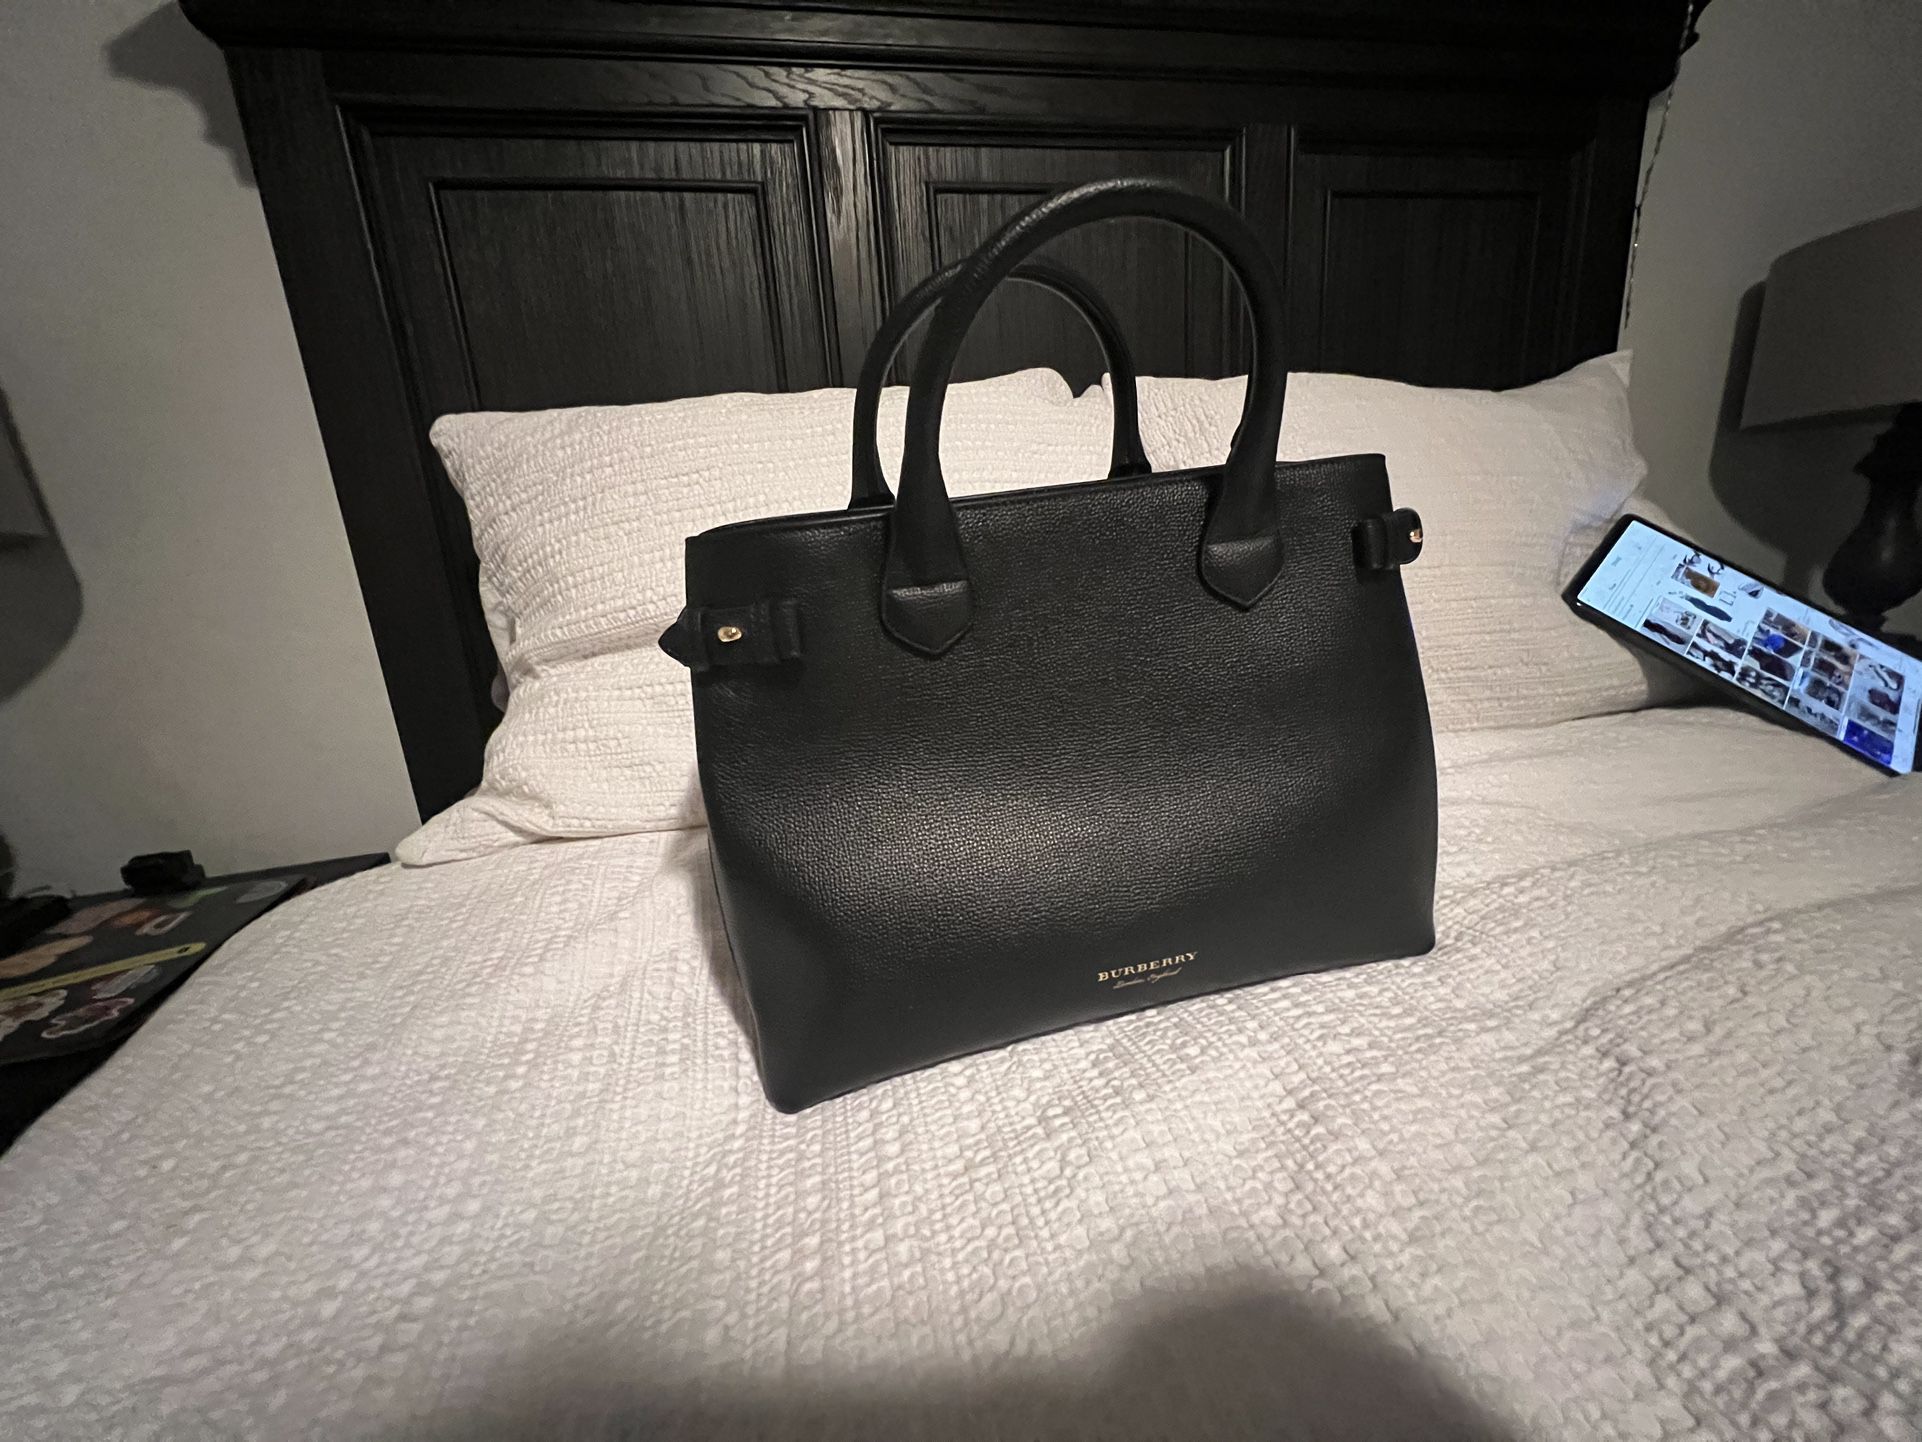 Burberry Banner Bag for Sale in Miami, FL - OfferUp